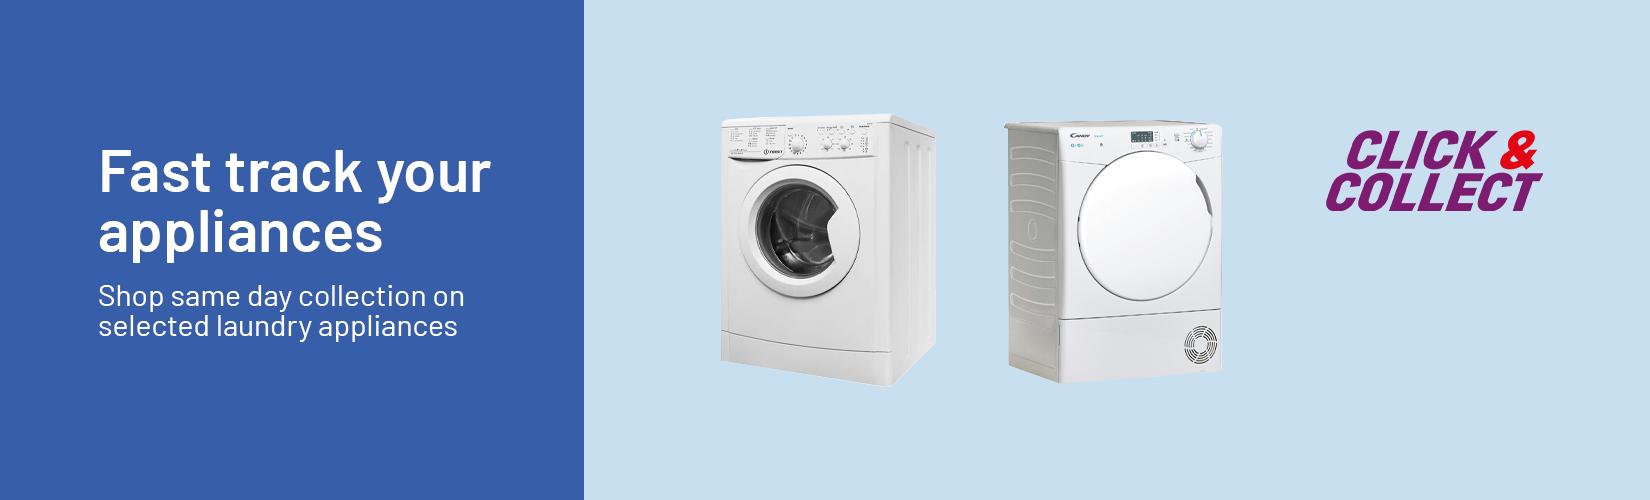 Fast track your appliances. Shop same day collection on selected laundry appliances.